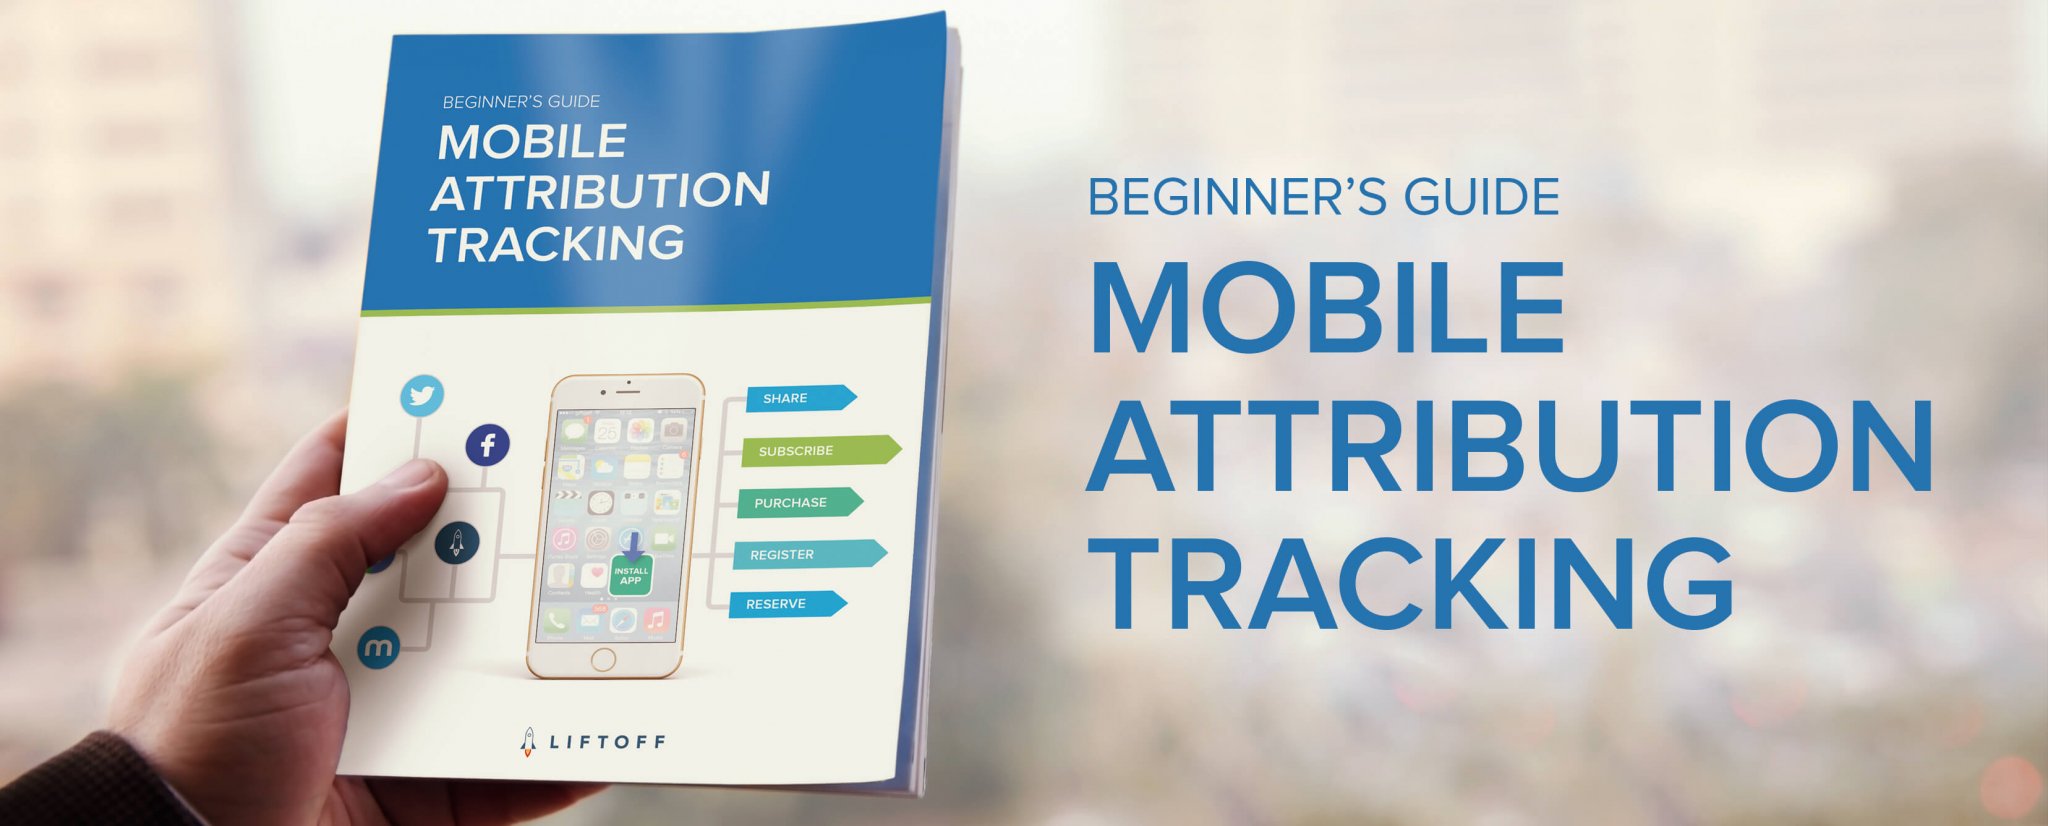 NEW! Beginner’s Guide to Mobile Attribution Tracking